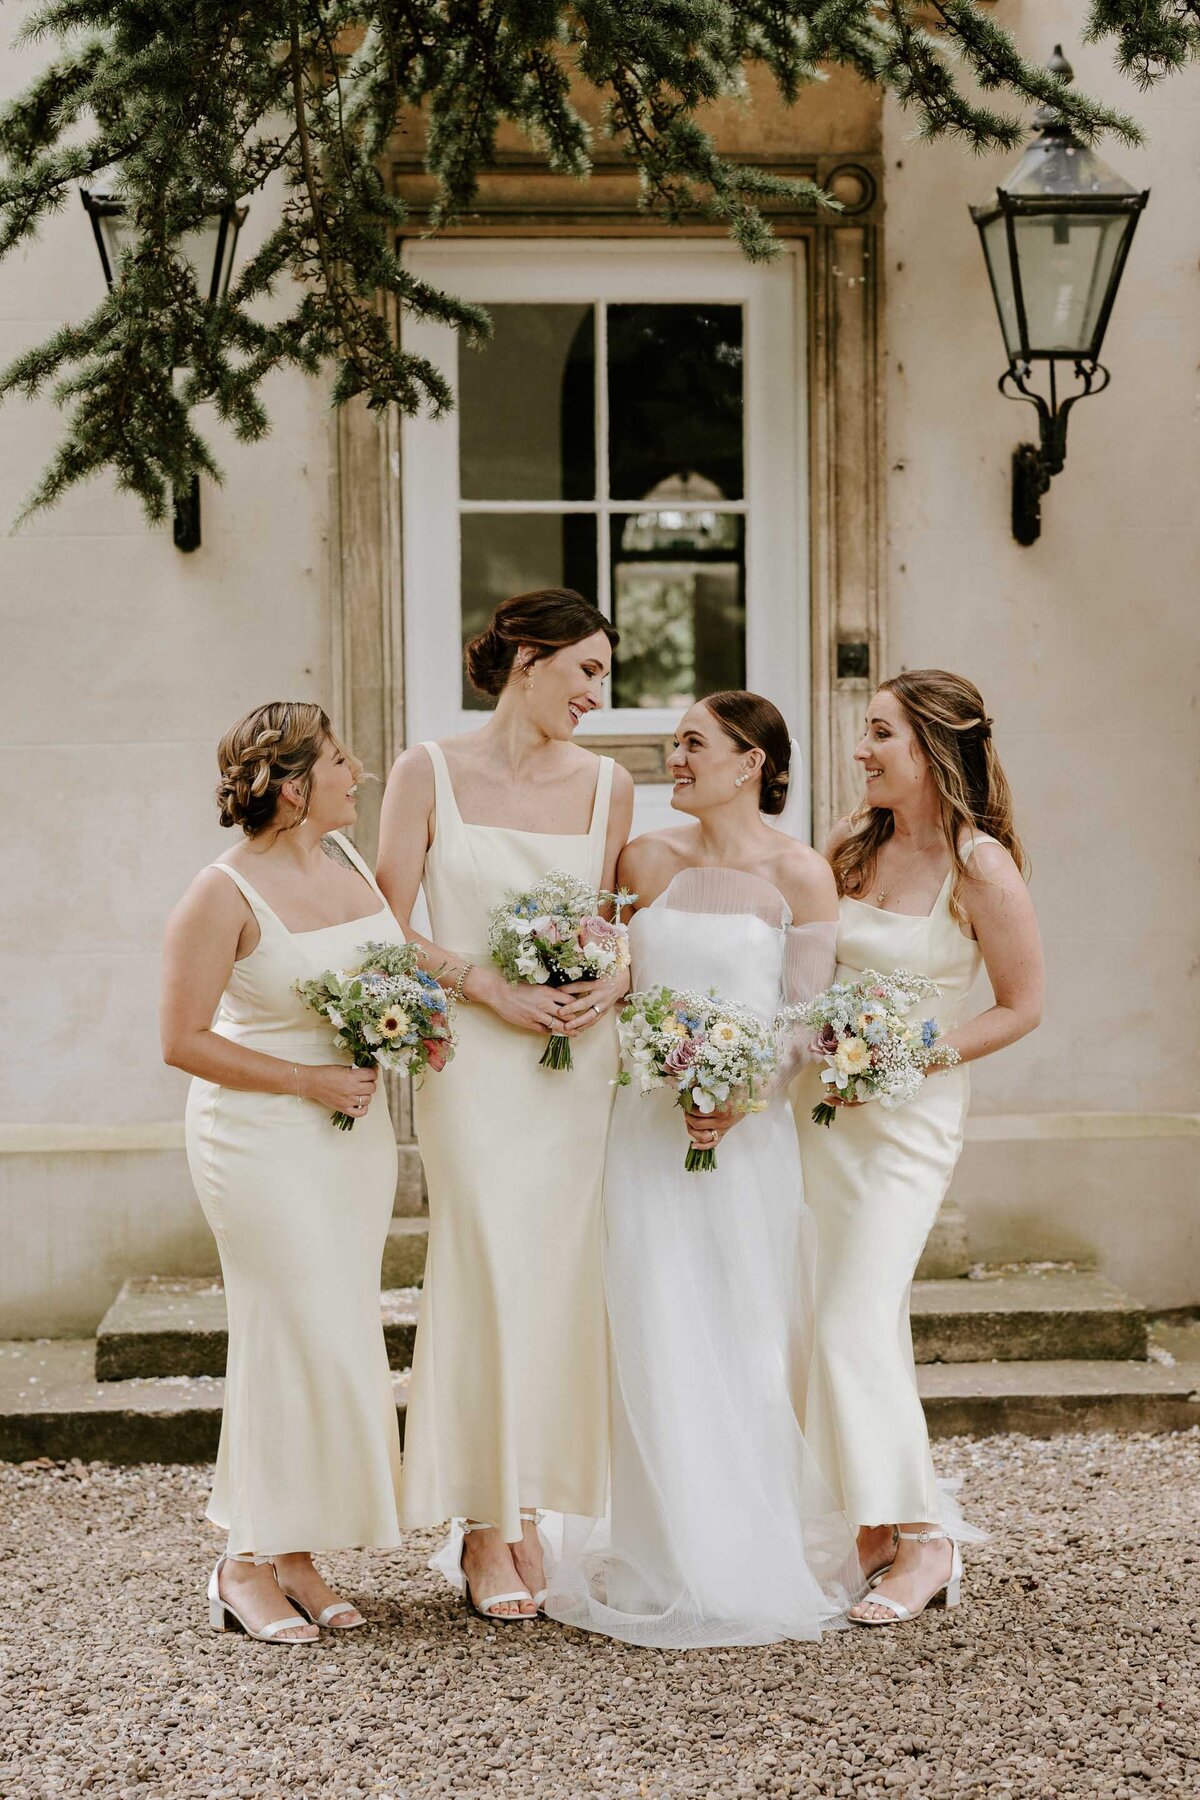 aswarby-rectory-wedding-photographer-linsey-james-laura-williams-photography10